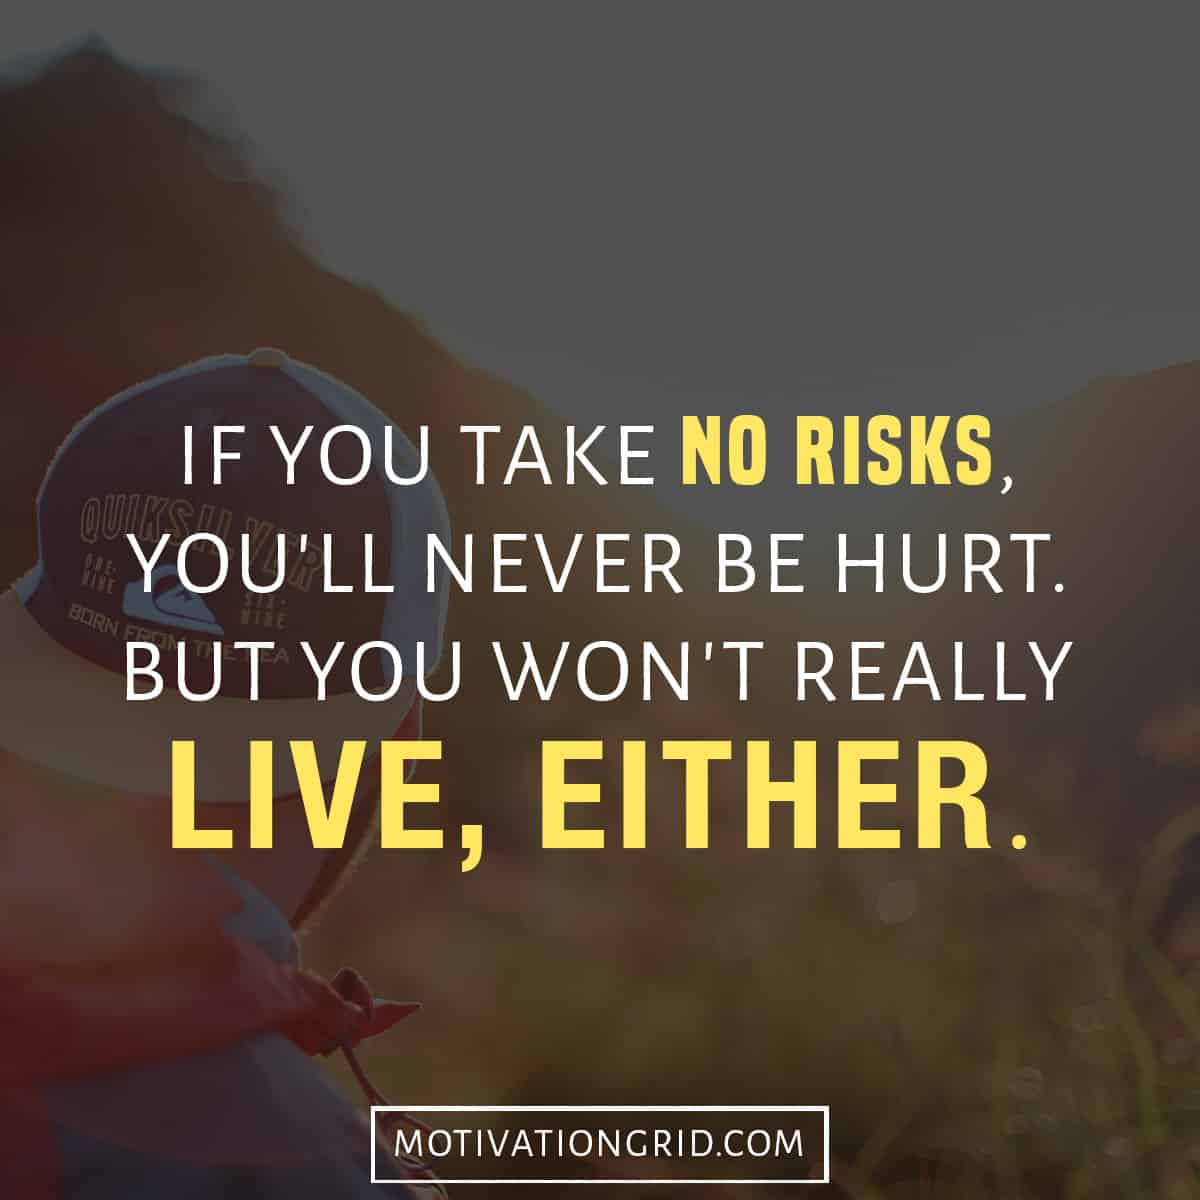 if you take no risks you will never be hurt but you won't really live either picture quote image